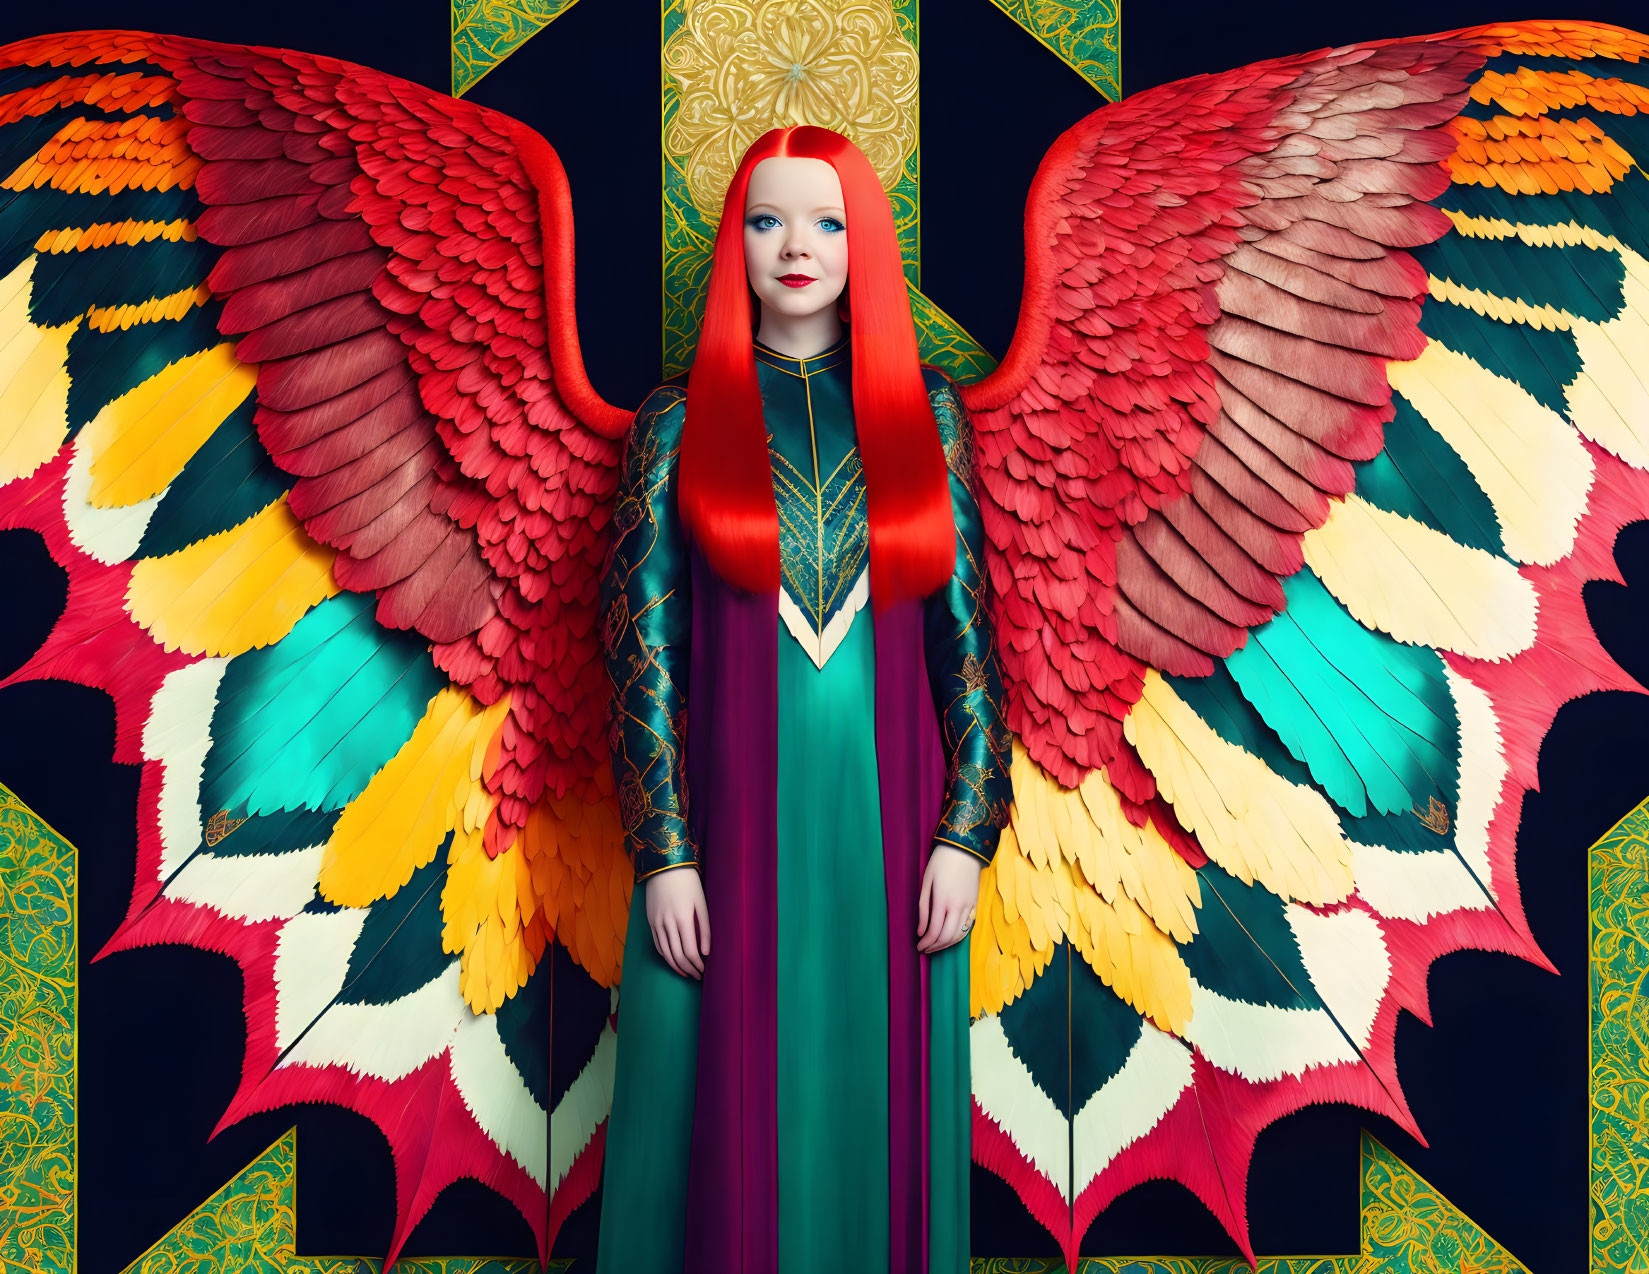 Red-haired woman in colorful winged costume against patterned backdrop